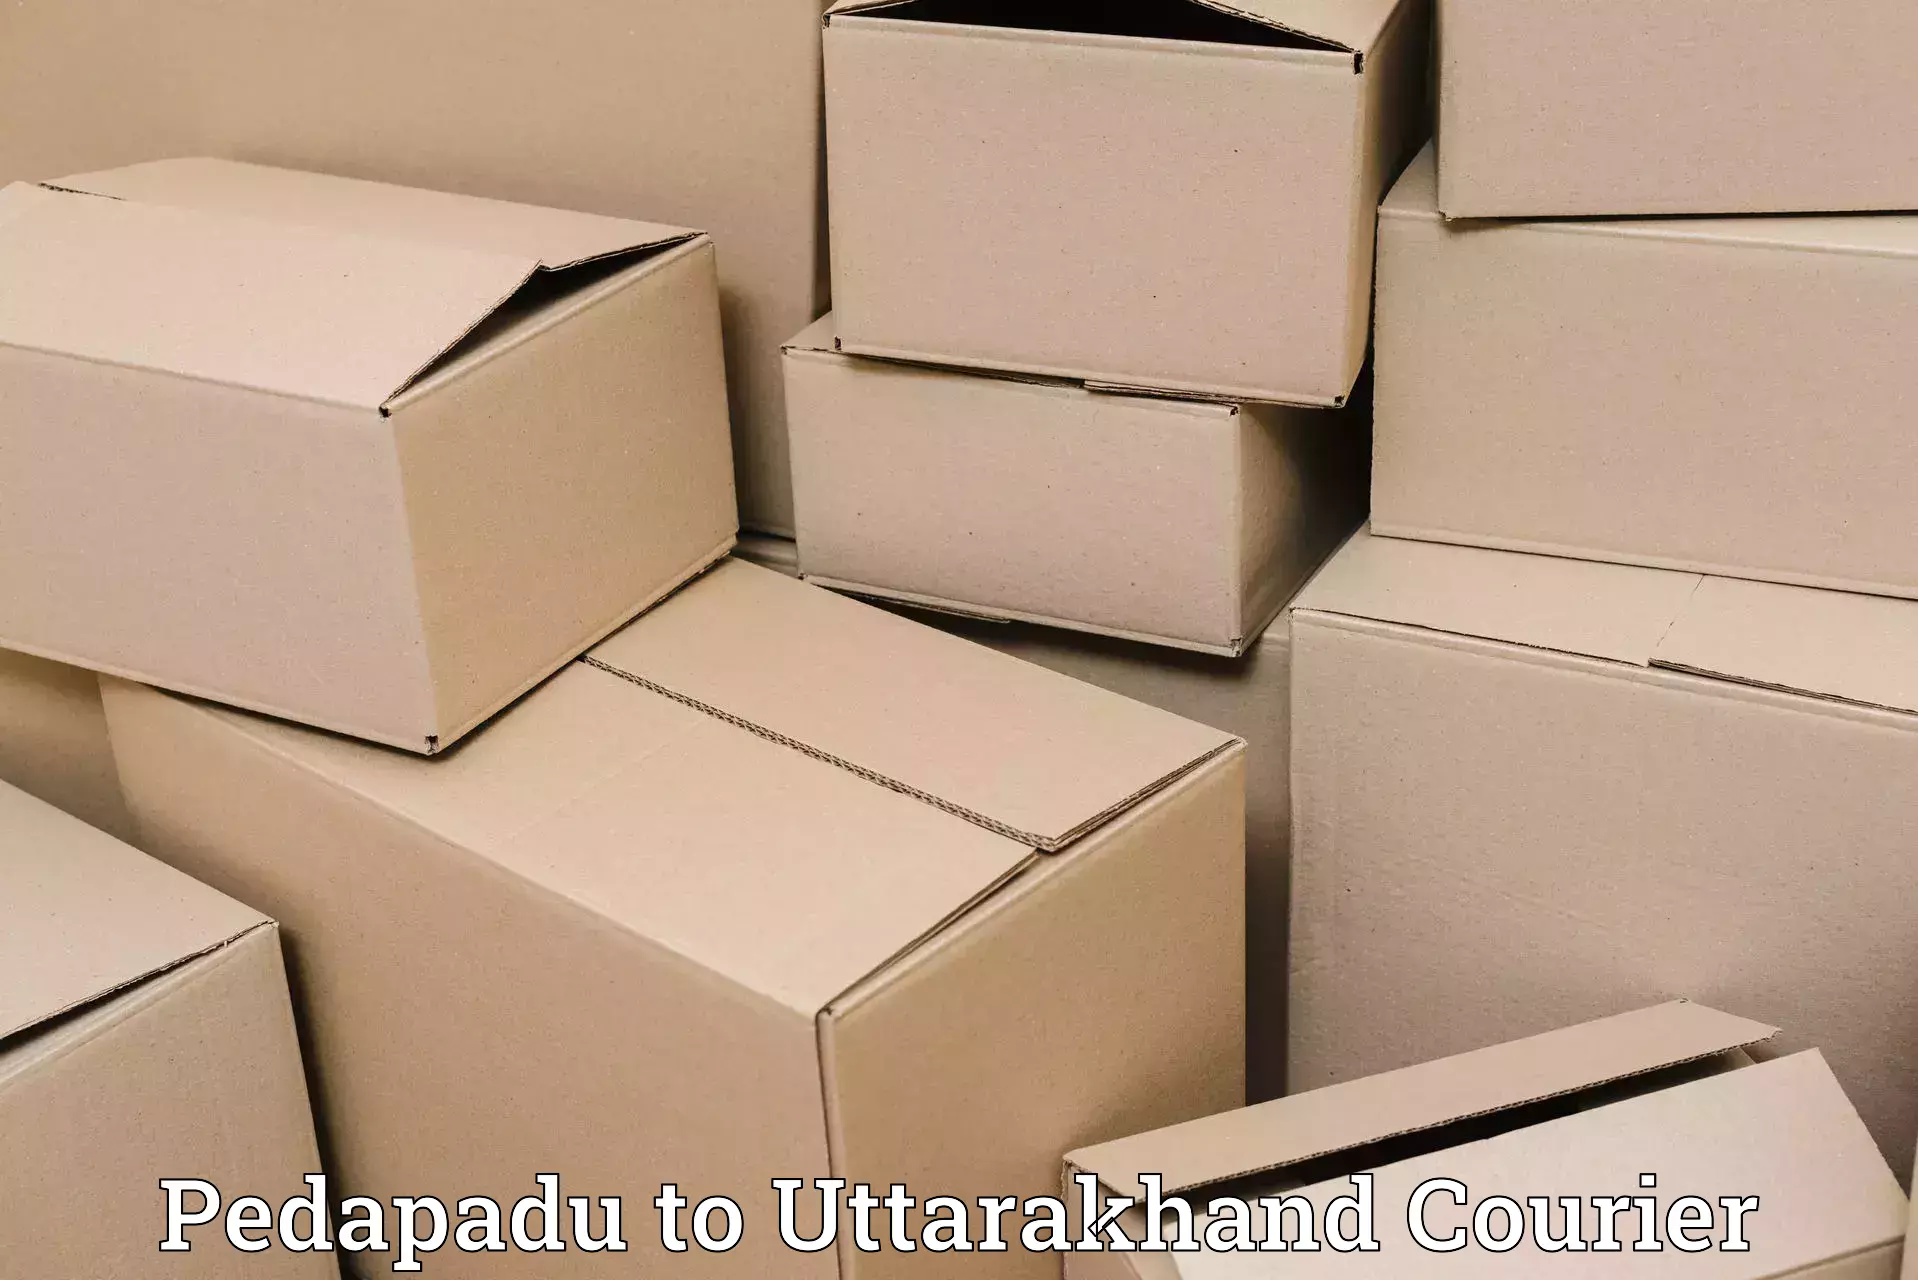 Flexible delivery scheduling Pedapadu to Tehri